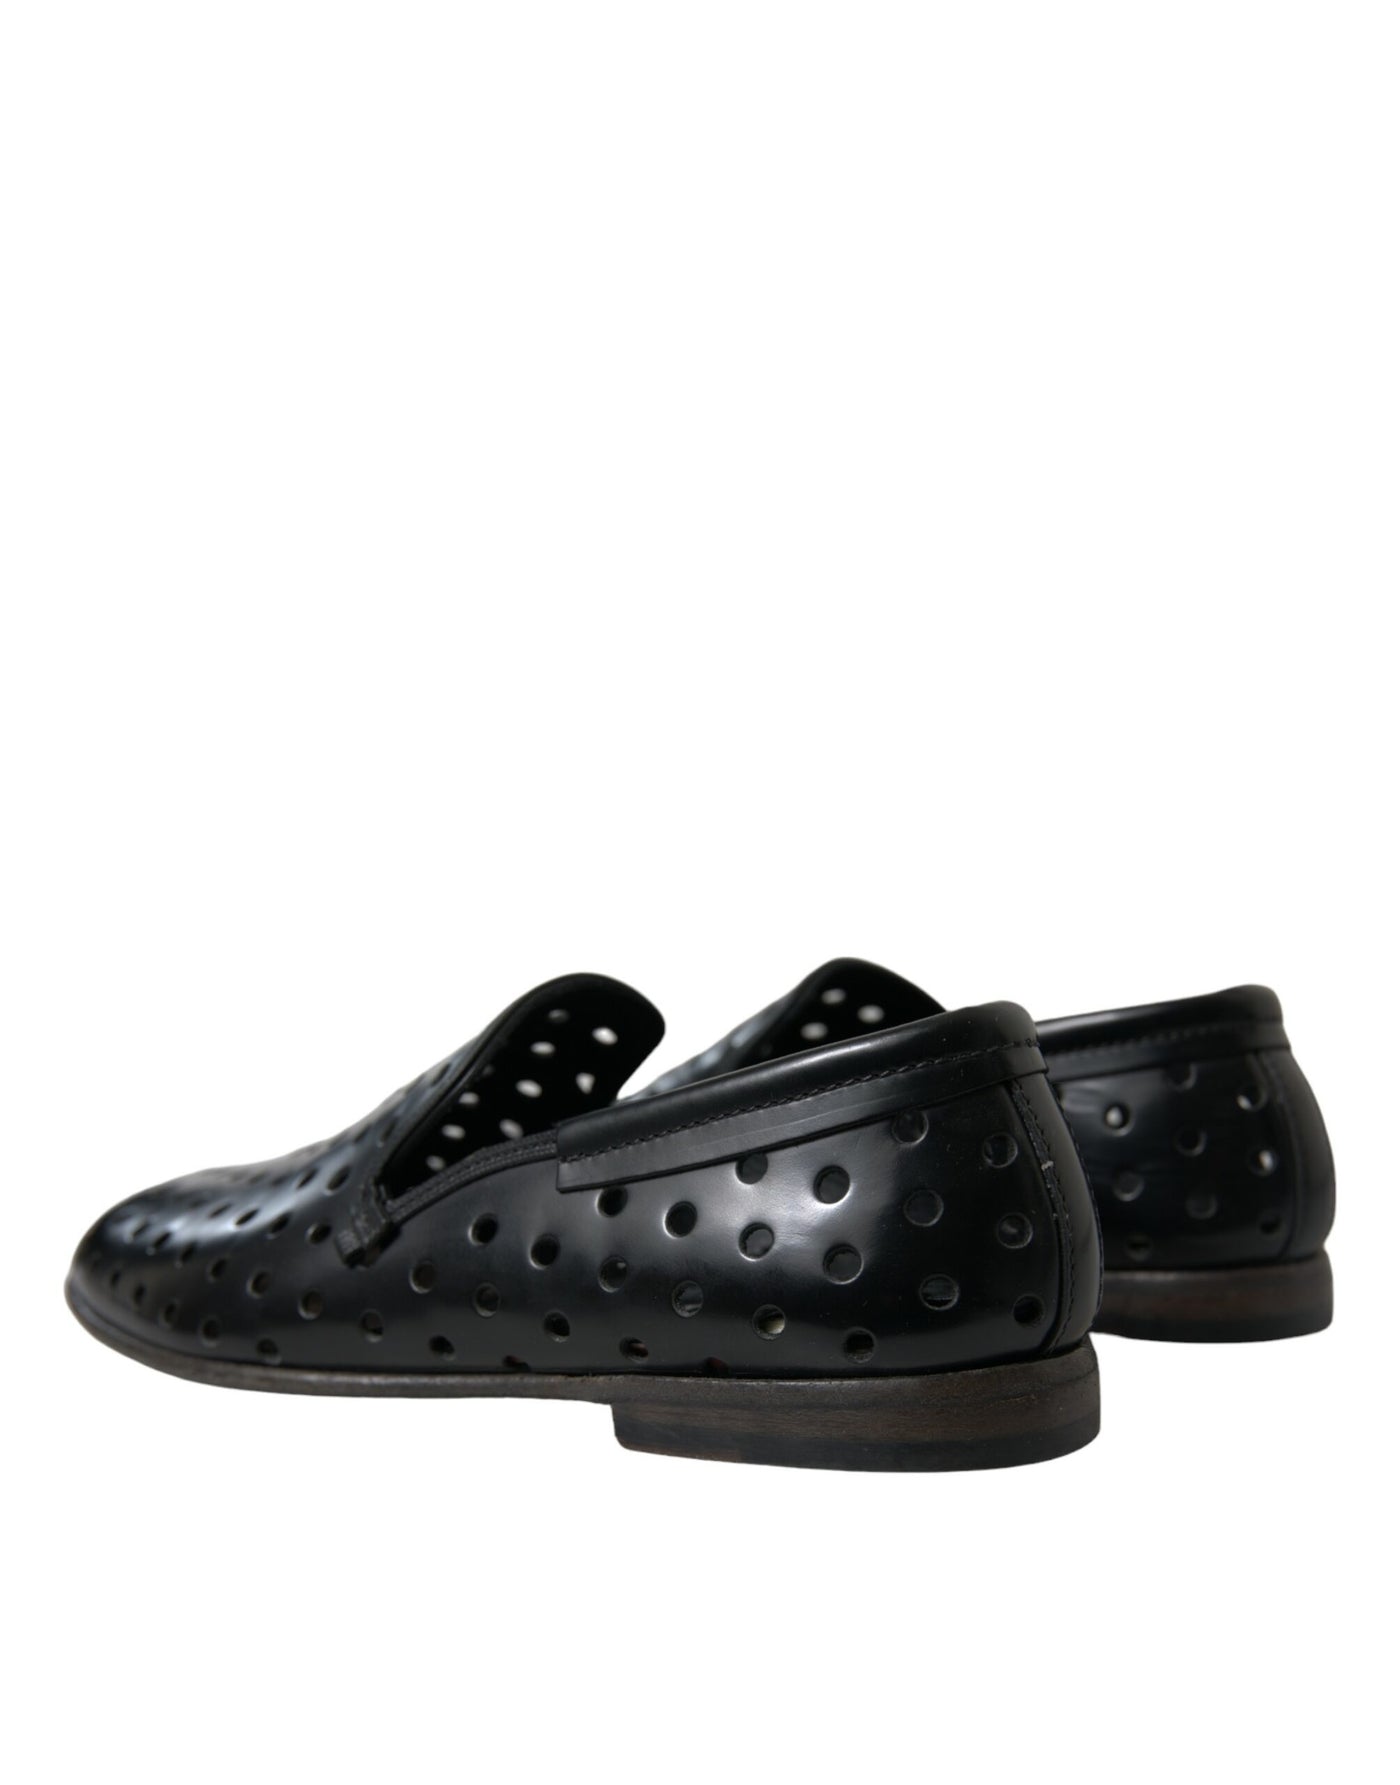 Dolce & Gabbana Black Leather Perforated Loafers Shoes